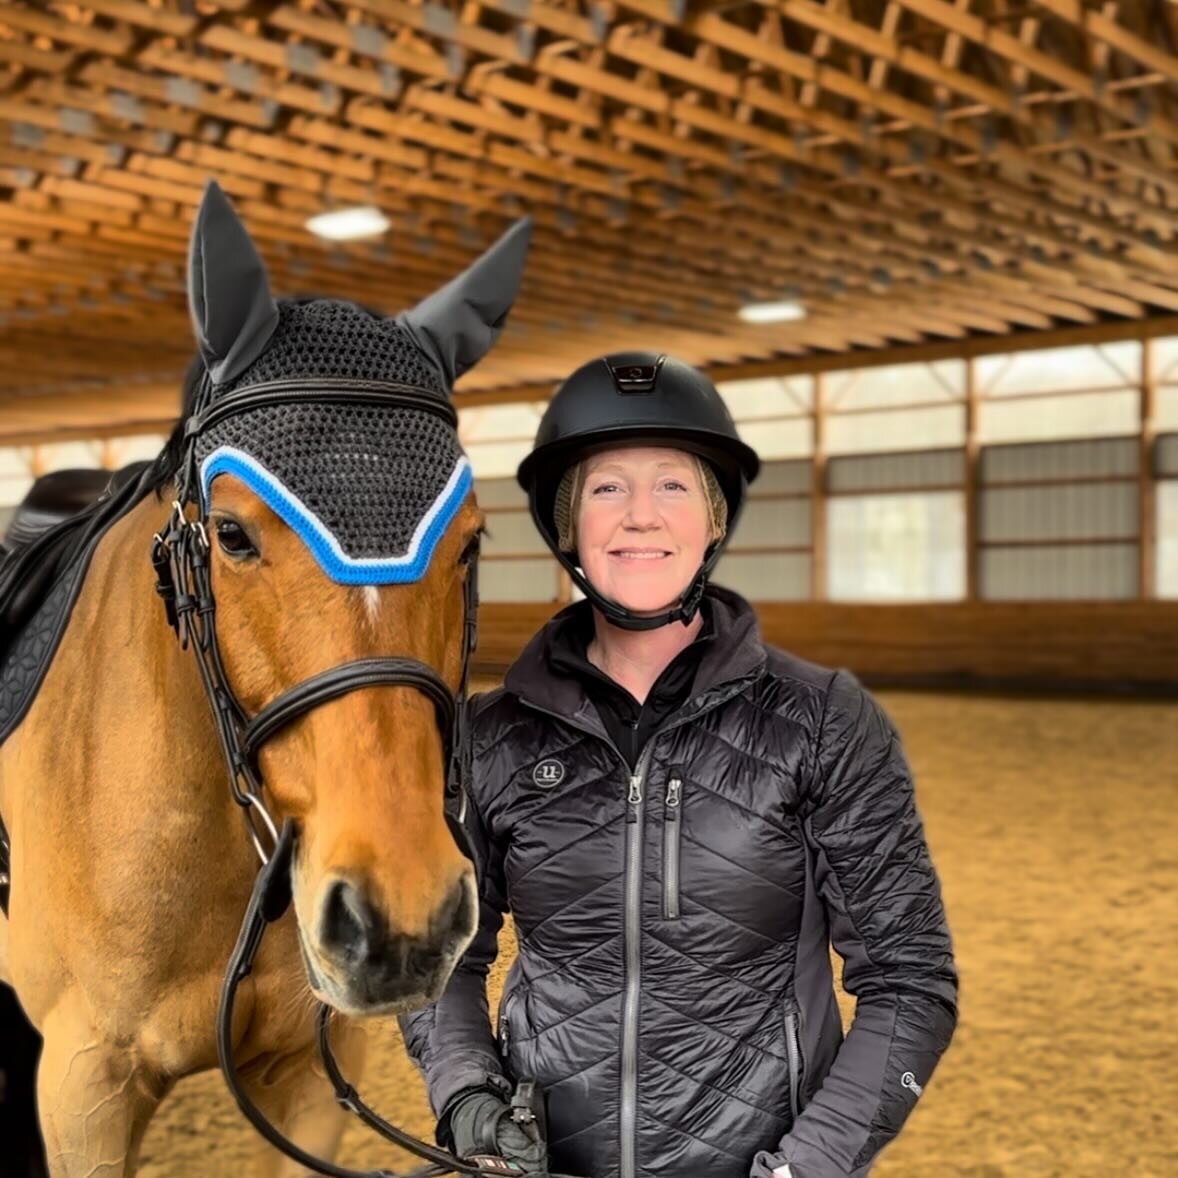 We&rsquo;re excited to announce that @rtheran1 is taking the reins as our head trainer. She brings to us over 20 years of experience as a hunter/jumper professional, with additional capabilities in dressage and eventing. A limited number of spaces ar